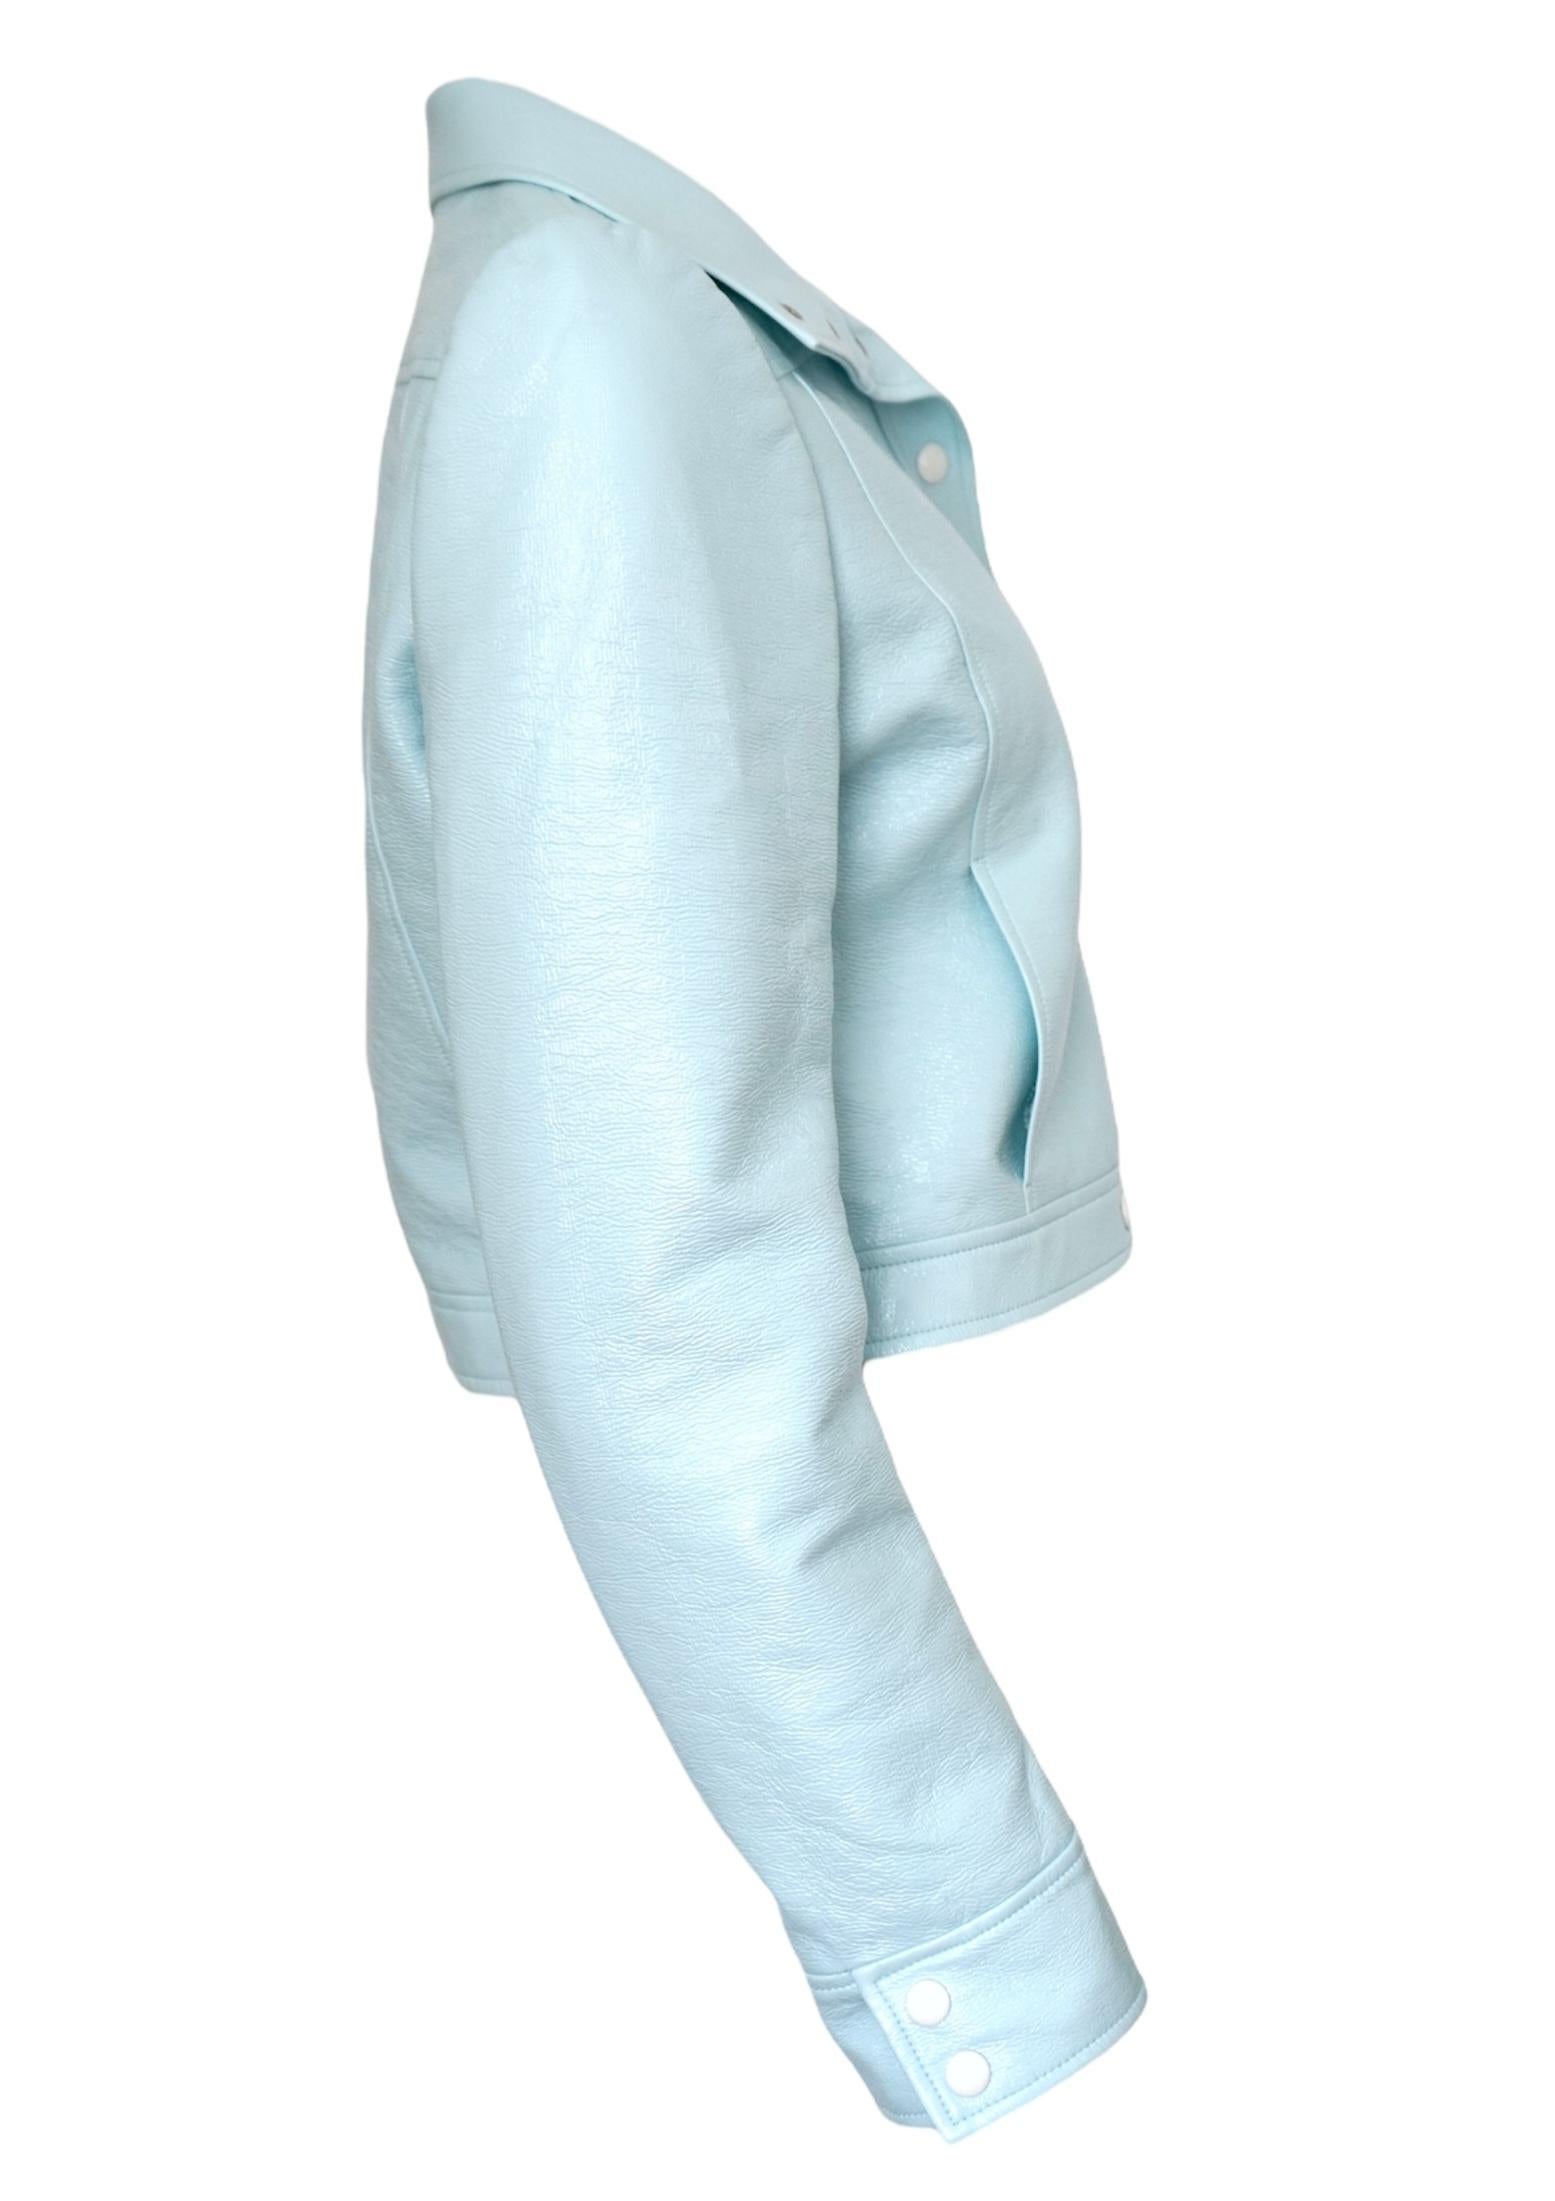 Pastel Blue vinyl jacket from COURRÈGES featuring a cotton blend, embroidered logo at the chest, spread collar, long sleeves, front button fastening and two side slit pockets.
Size 42
Comes with clothing bag
Cotton 88%, Polyurethane 10%, Elastane 2%